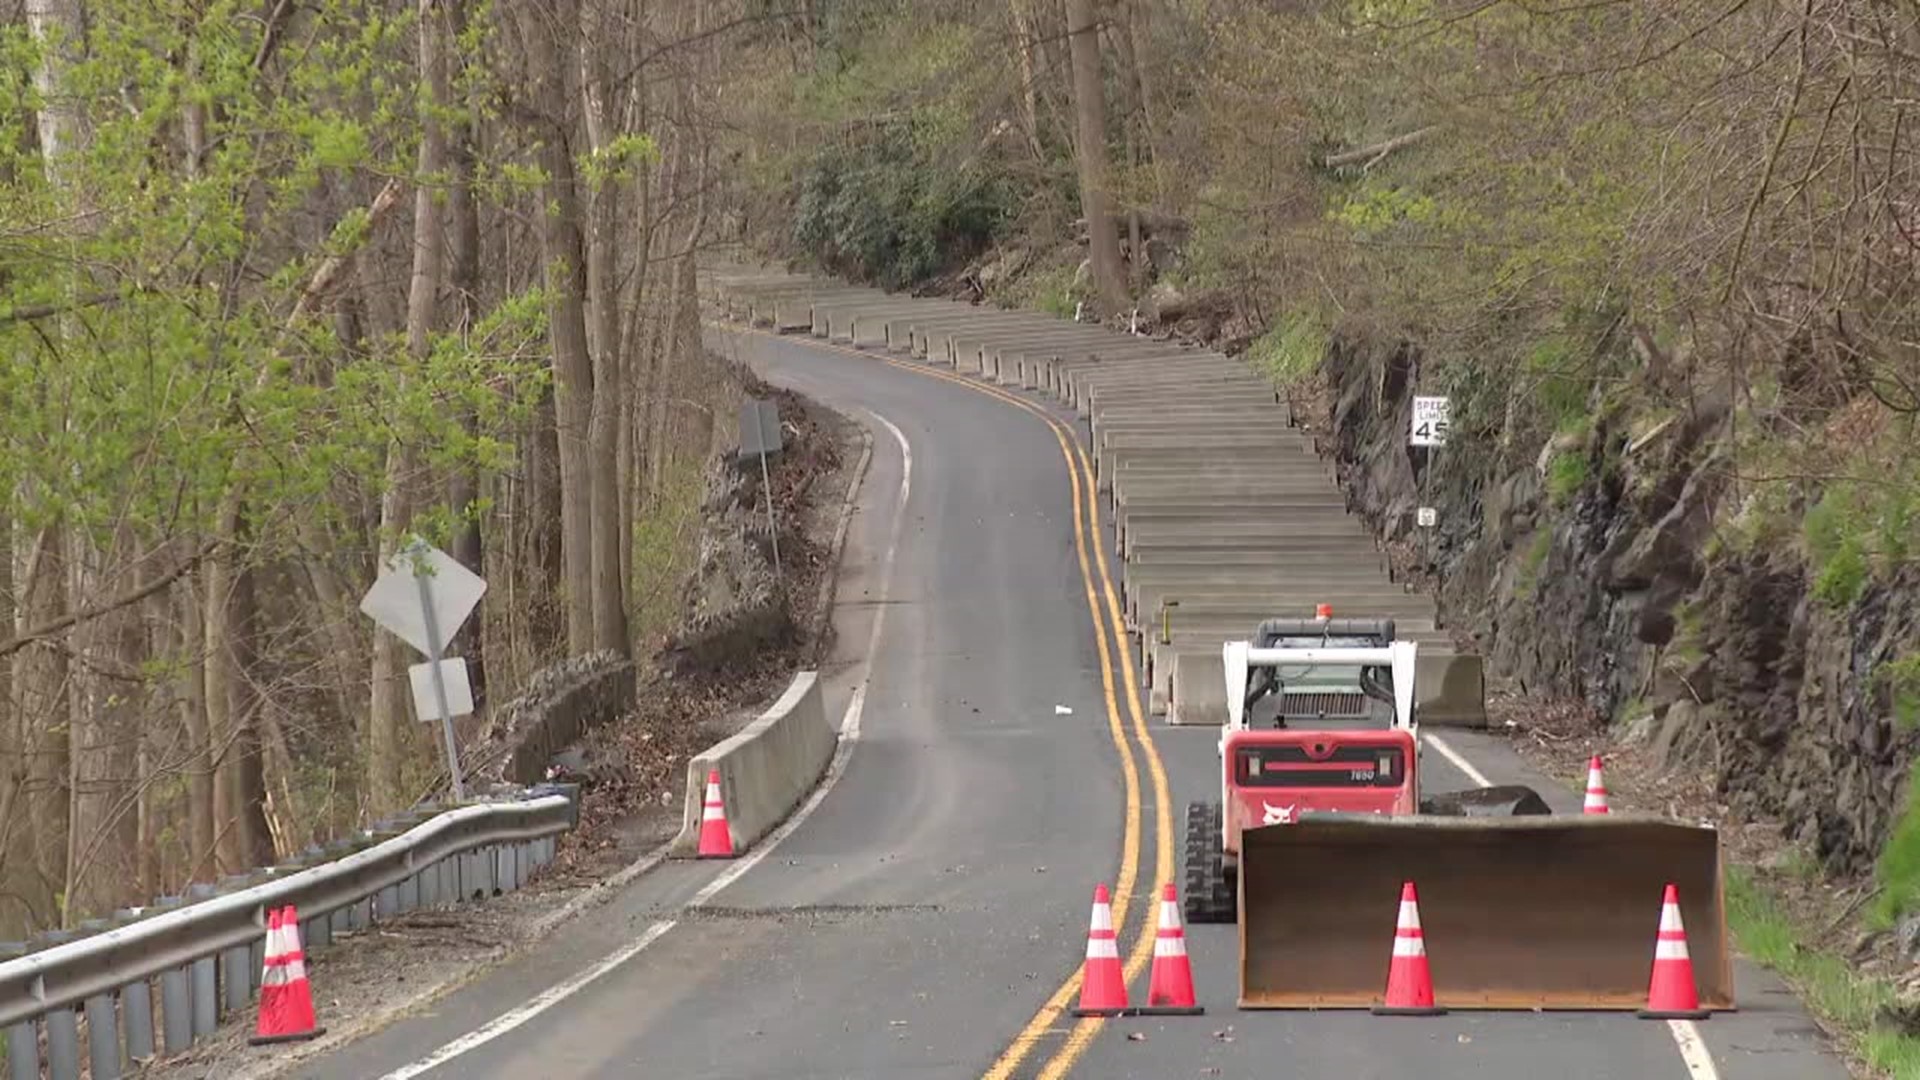 PennDOT estimates this section of Route 611 will be open after emergency work by the end of the spring.